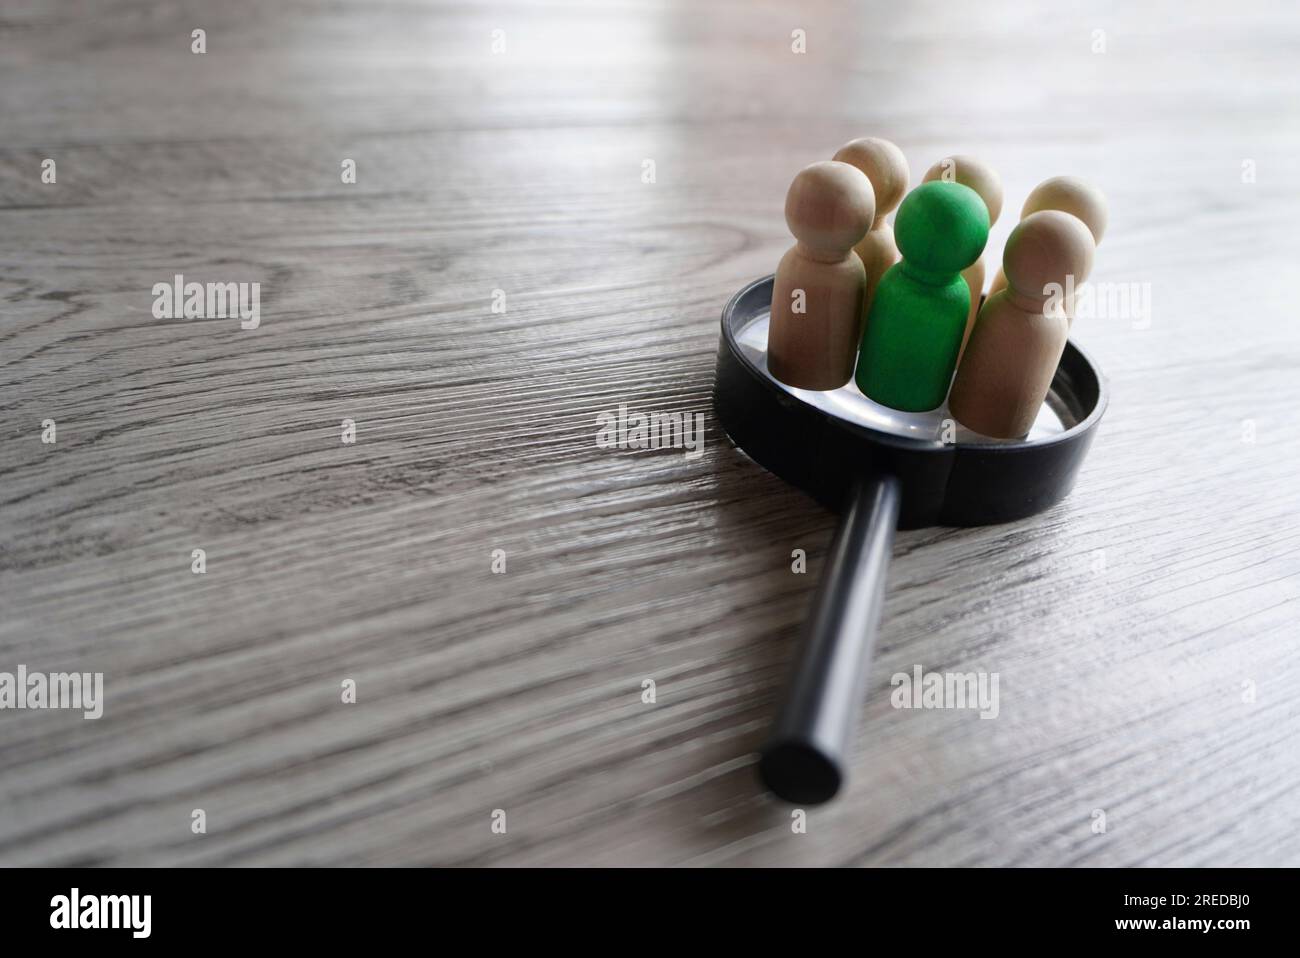 Wooden dolls on top of magnifying glass. Human resources, target market and audience, focus group concept Stock Photo